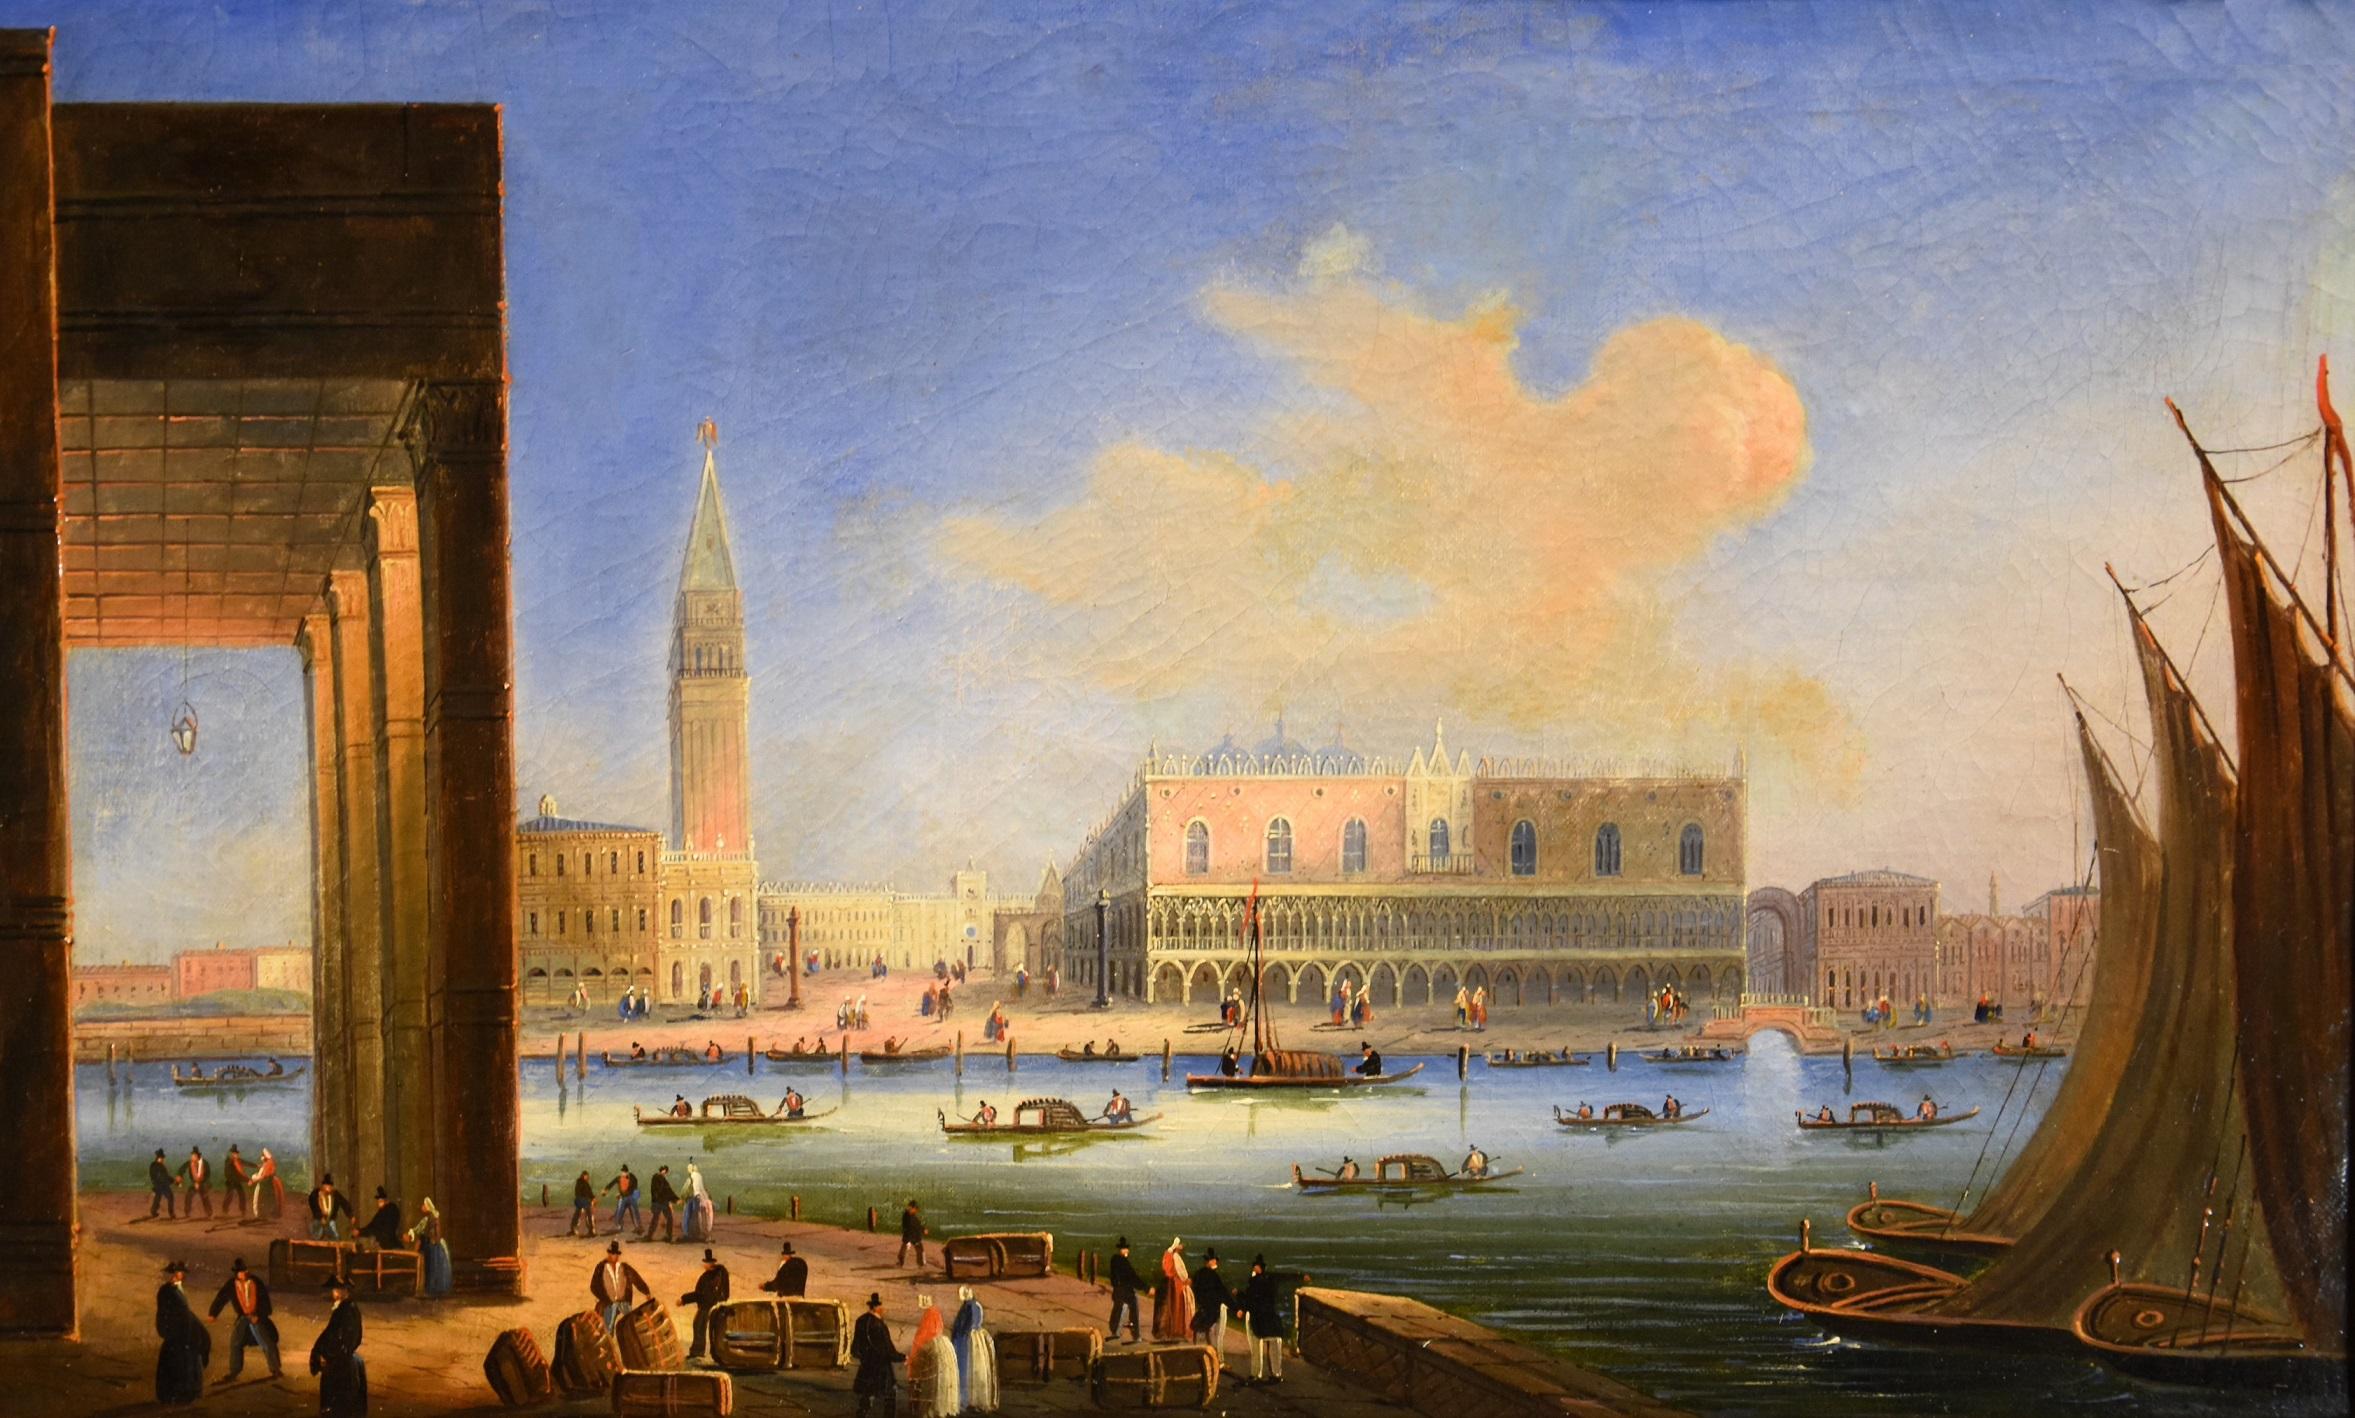 Venezia San Marco Carlo Bossoli Paint Oil on canvas Old master 19th Century  Art For Sale at 1stDibs